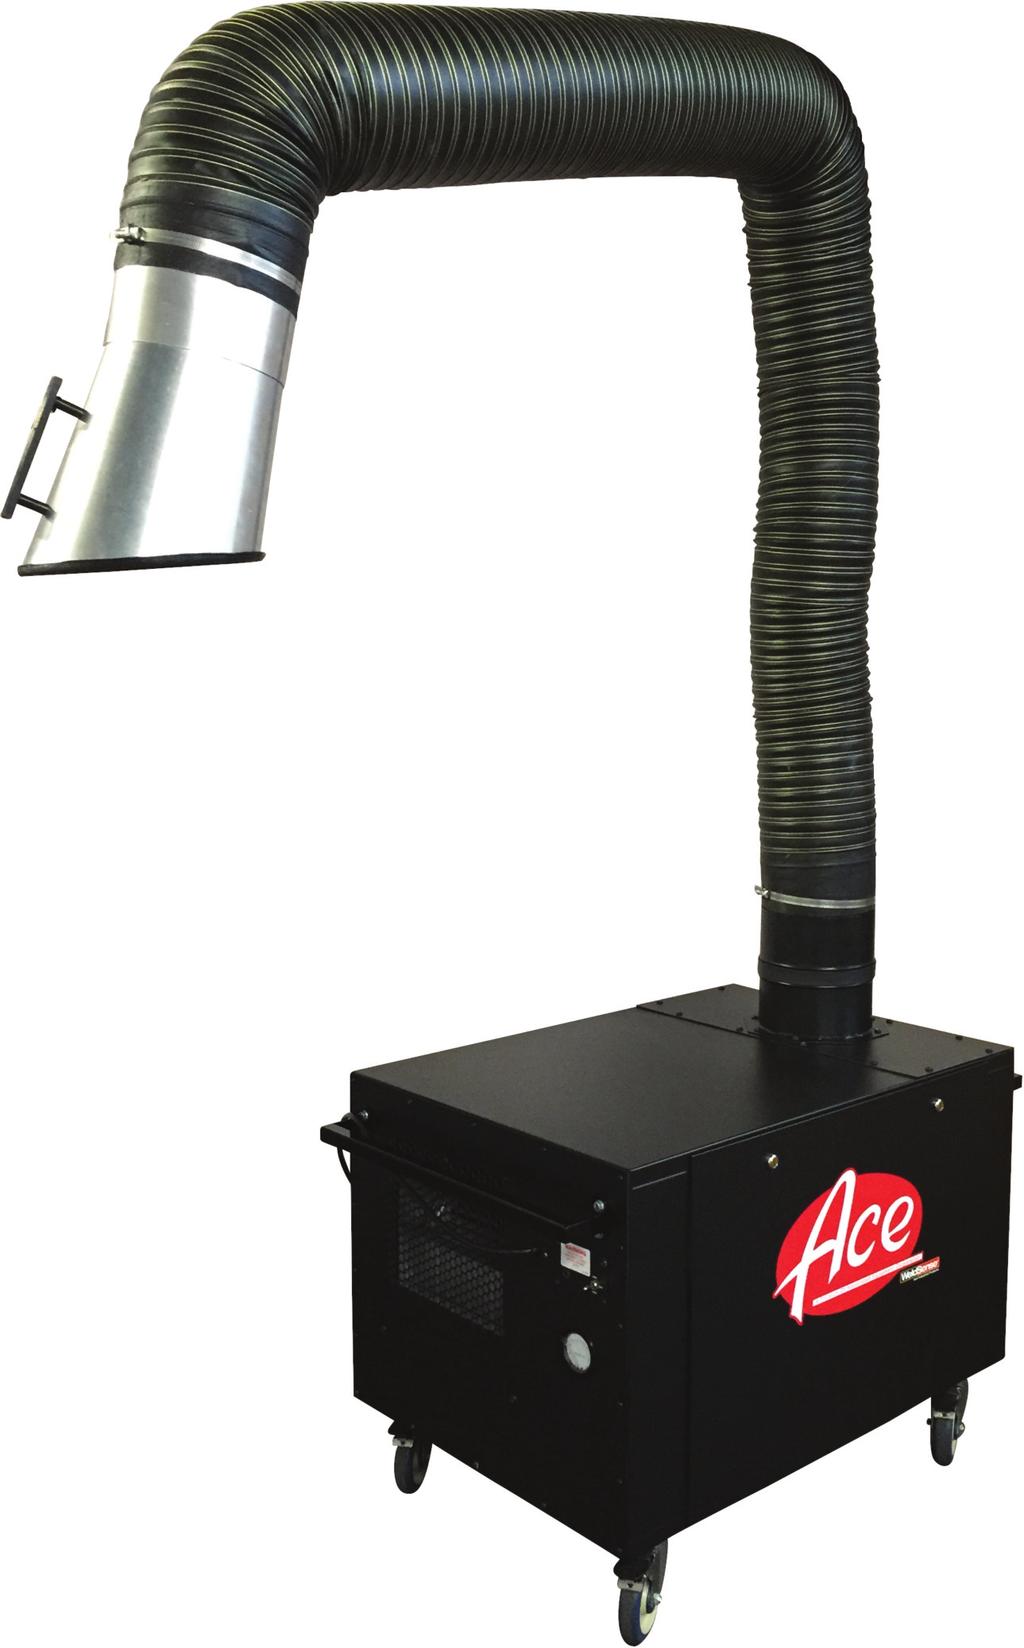 73-701 Mobile Fume Extractor For production, maintenance, and hobbyist welding, our newest extractor is small enough to carry onto jobsites, yet powerful enough to use for heavy duty production